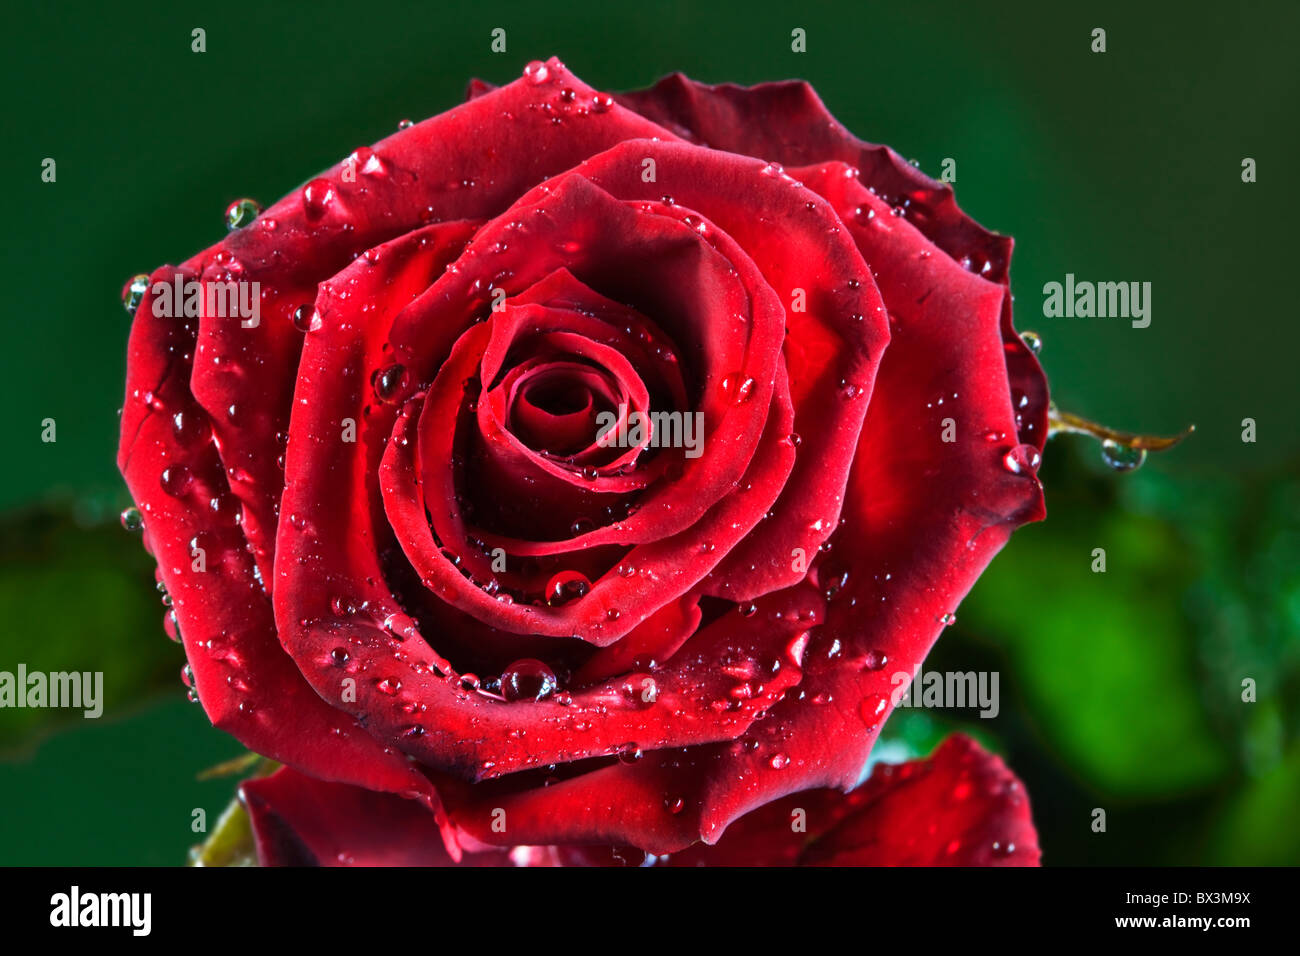 Red rose covered in drops of water Stock Photo